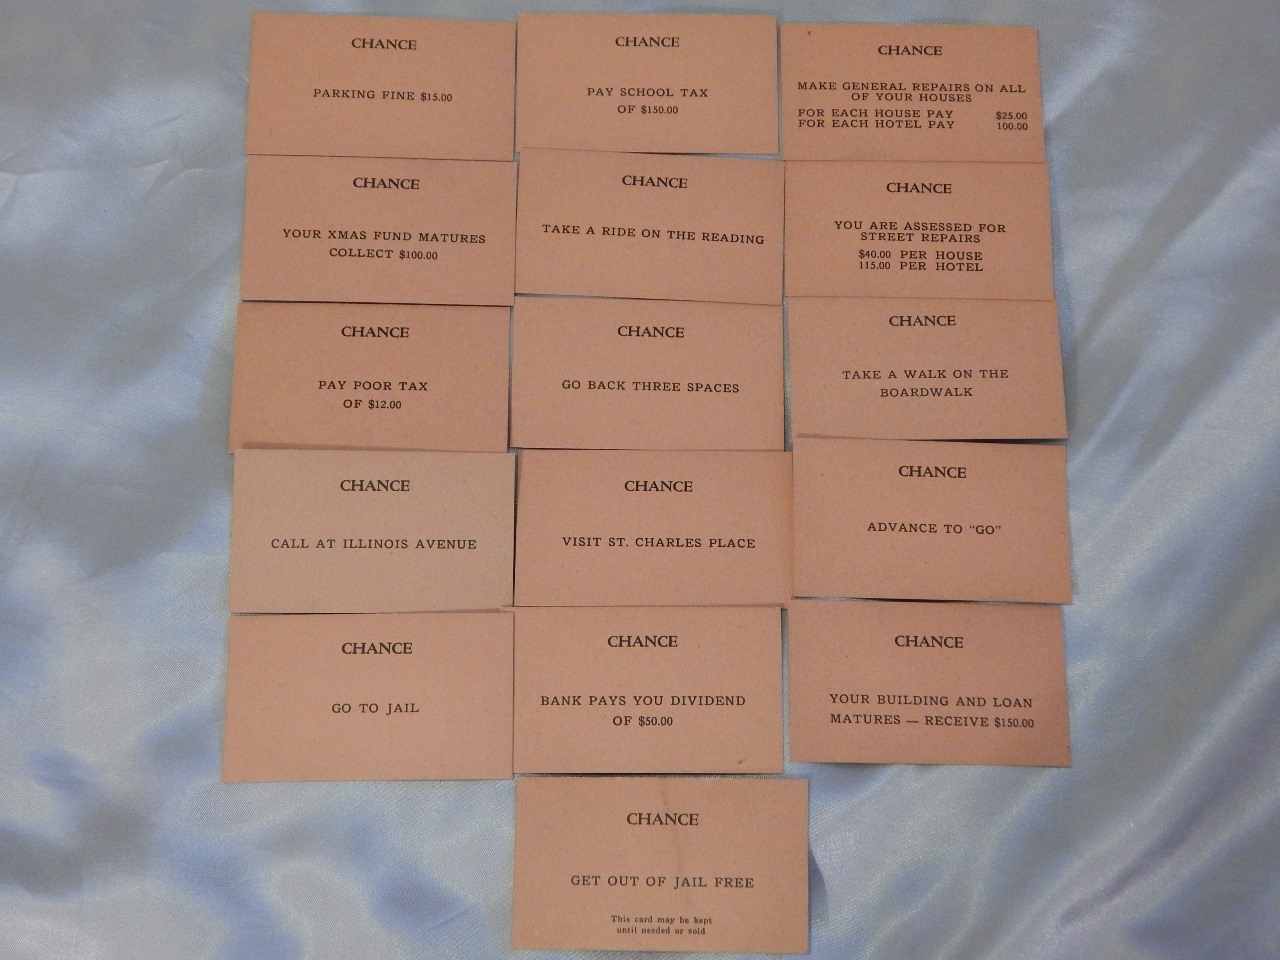 monopoly chance cards back